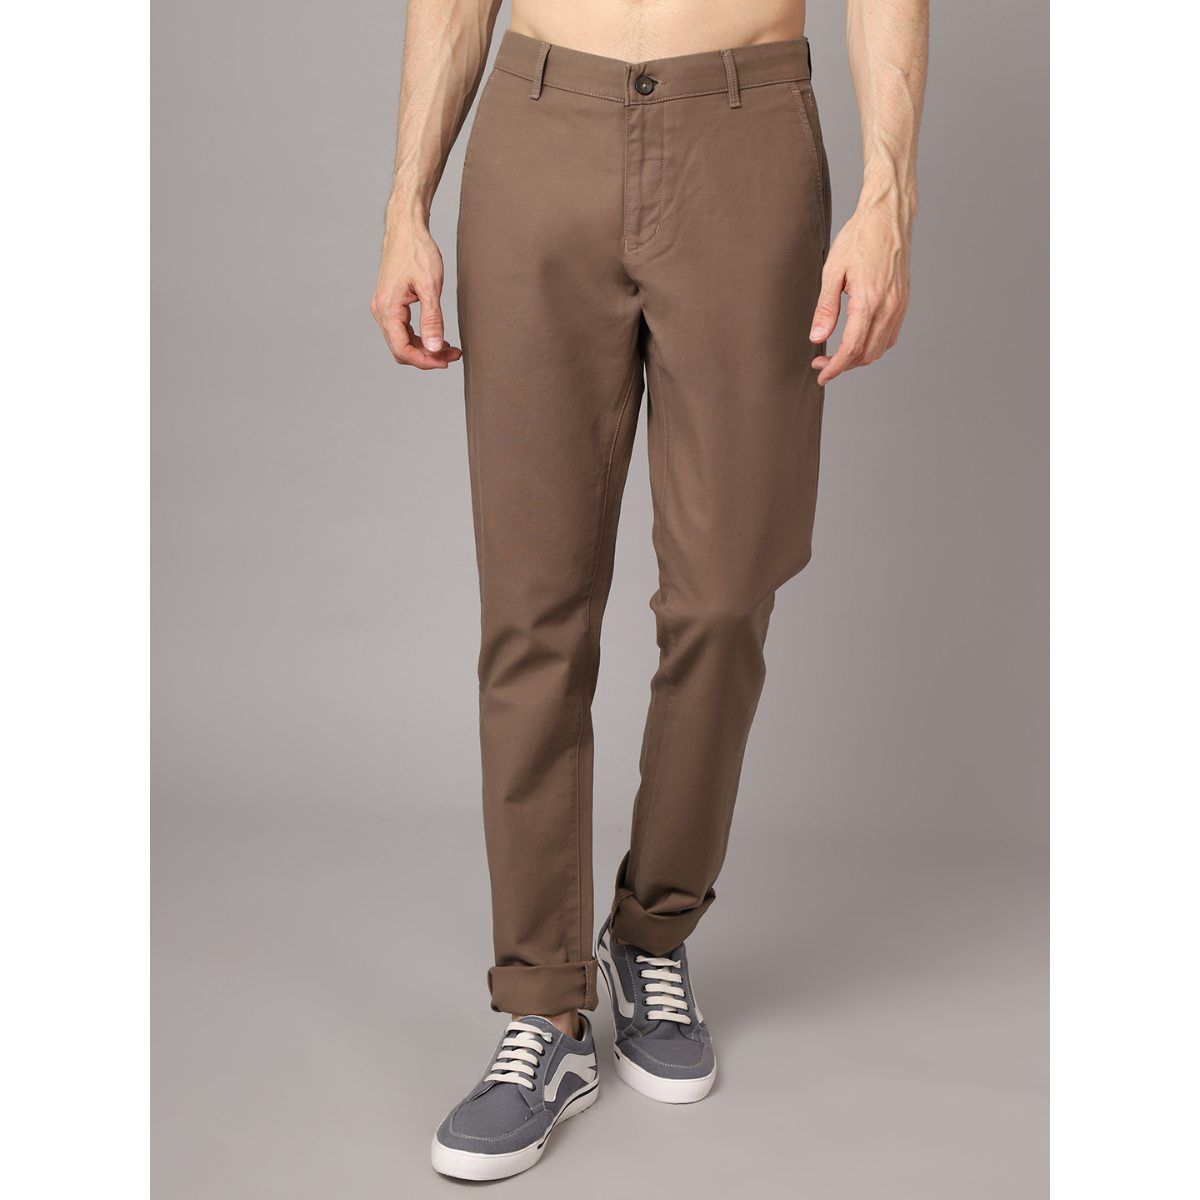 Light Brown Stretchable Slim Fit Trousers For Men at Rs 857 | Men Slim Fit  Trouser | ID: 25386434648